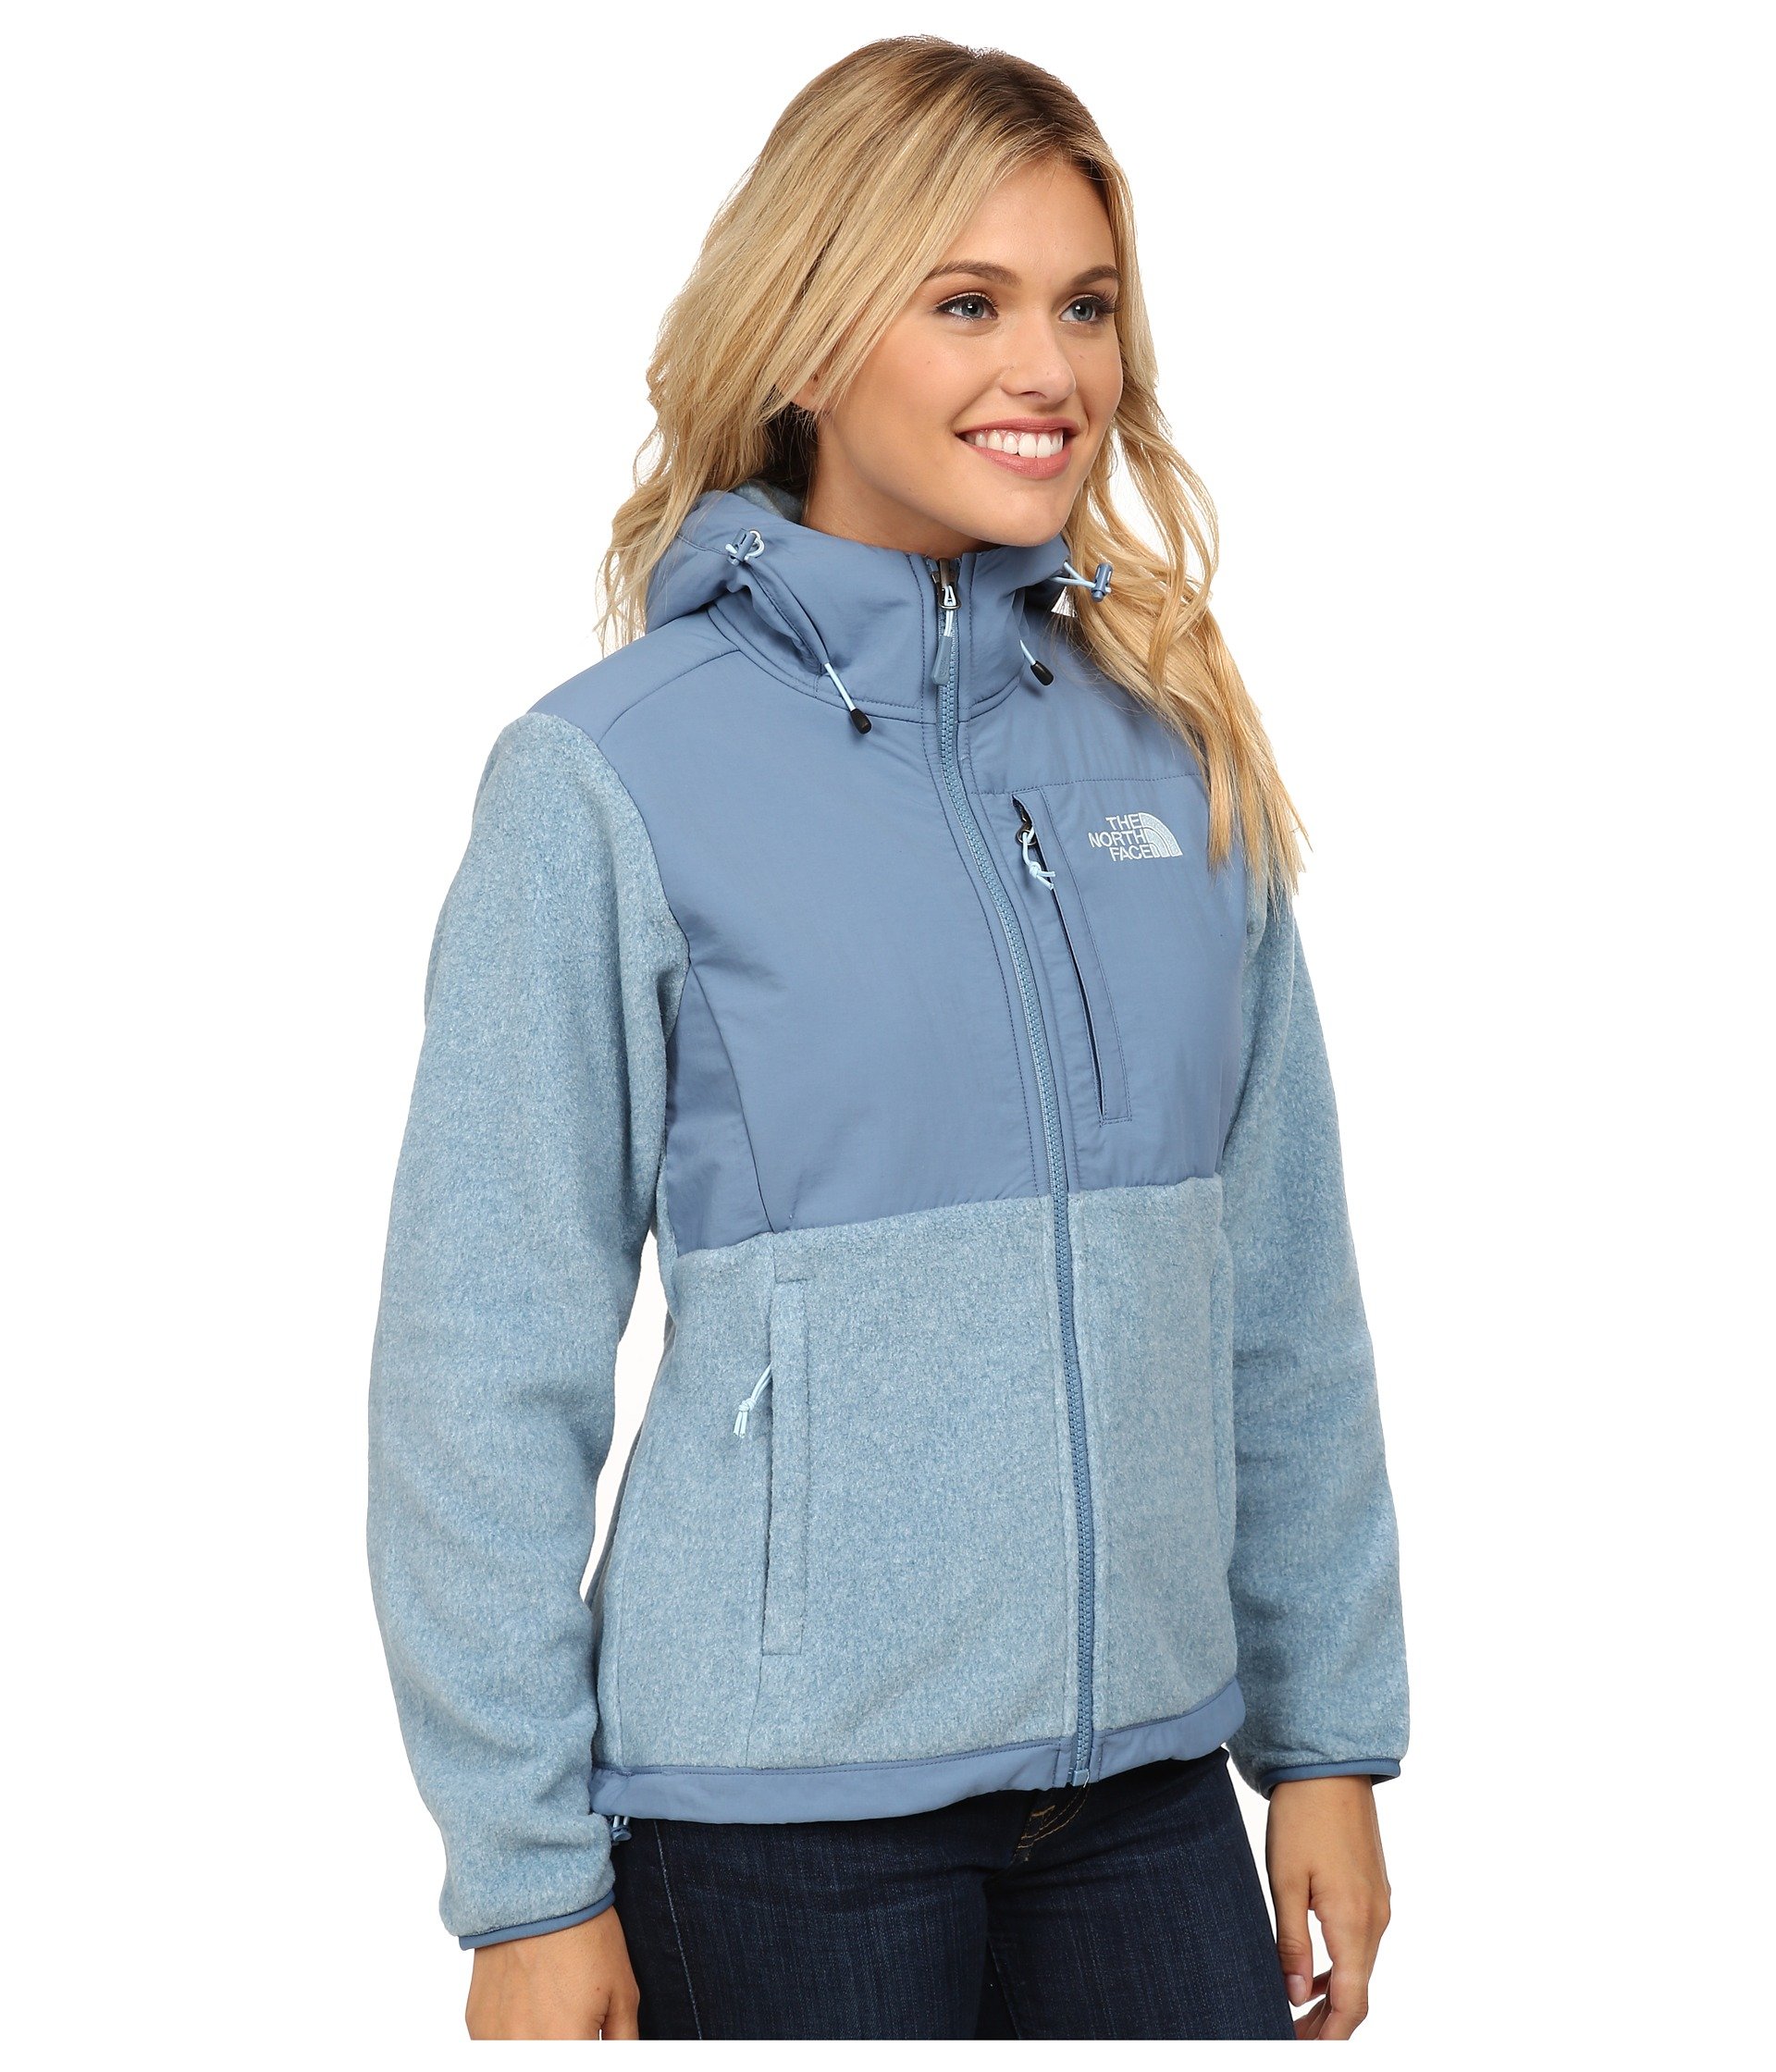 Lyst - The North Face Denali Hoodie in Blue